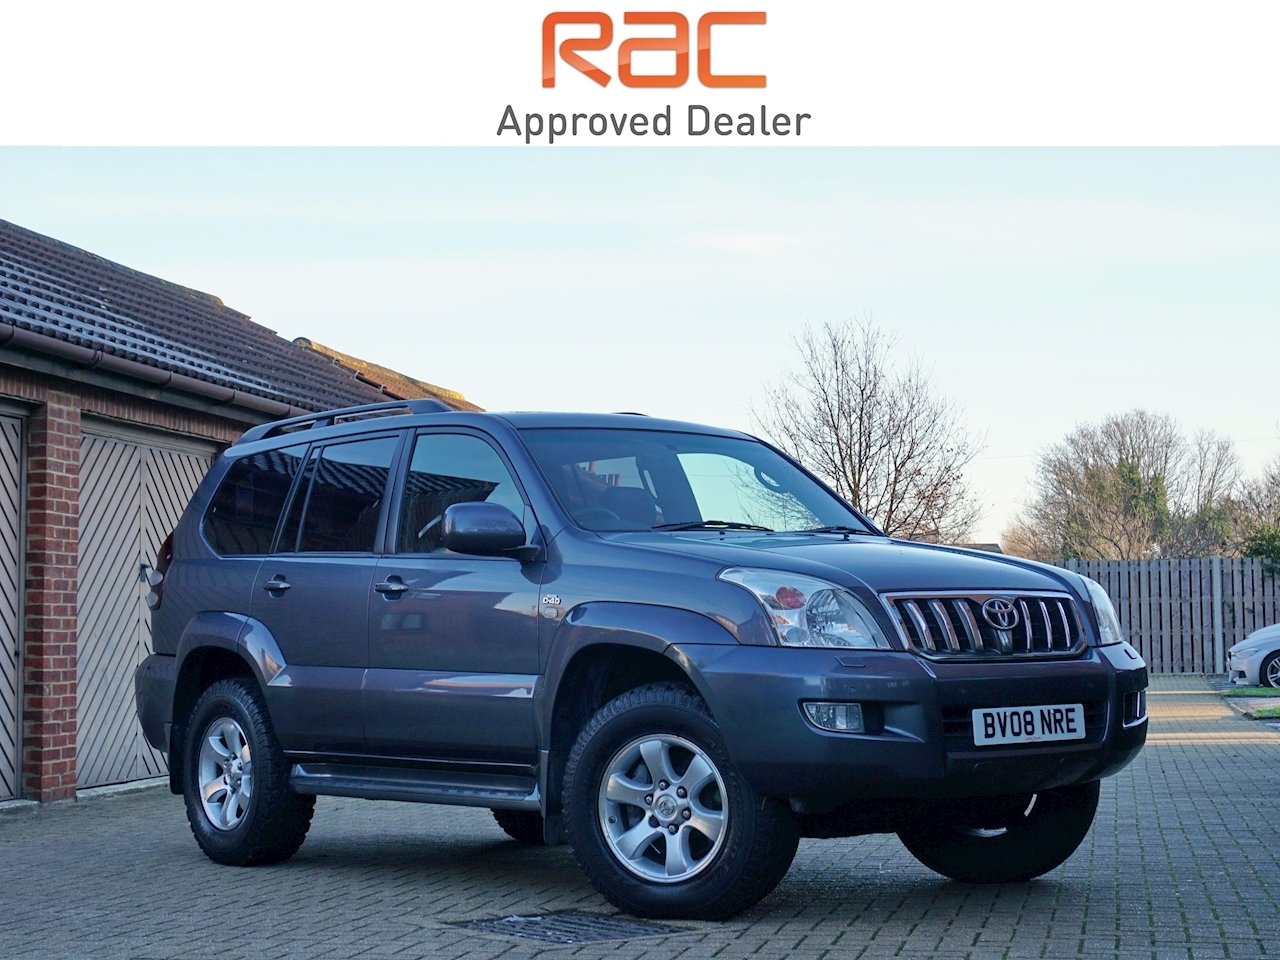 Used 08 Toyota Land Cruiser D 4d Lc4 8 Seat Estate 3 0 Automatic Diesel For Sale In Surrey Classic Automobiles